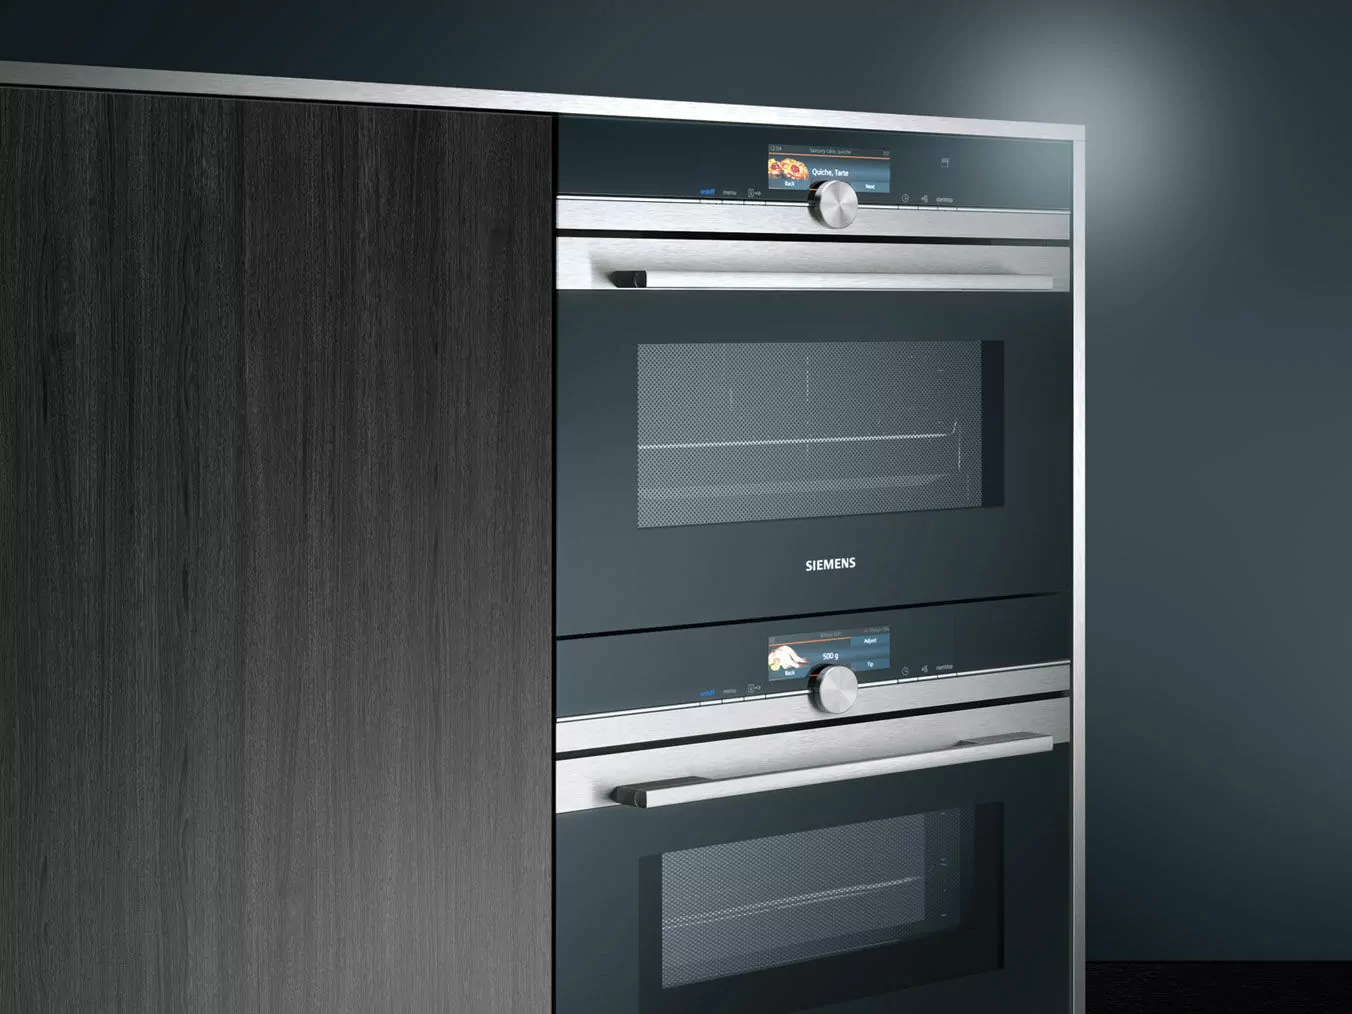 Siemens steam oven with sous-vide functionality